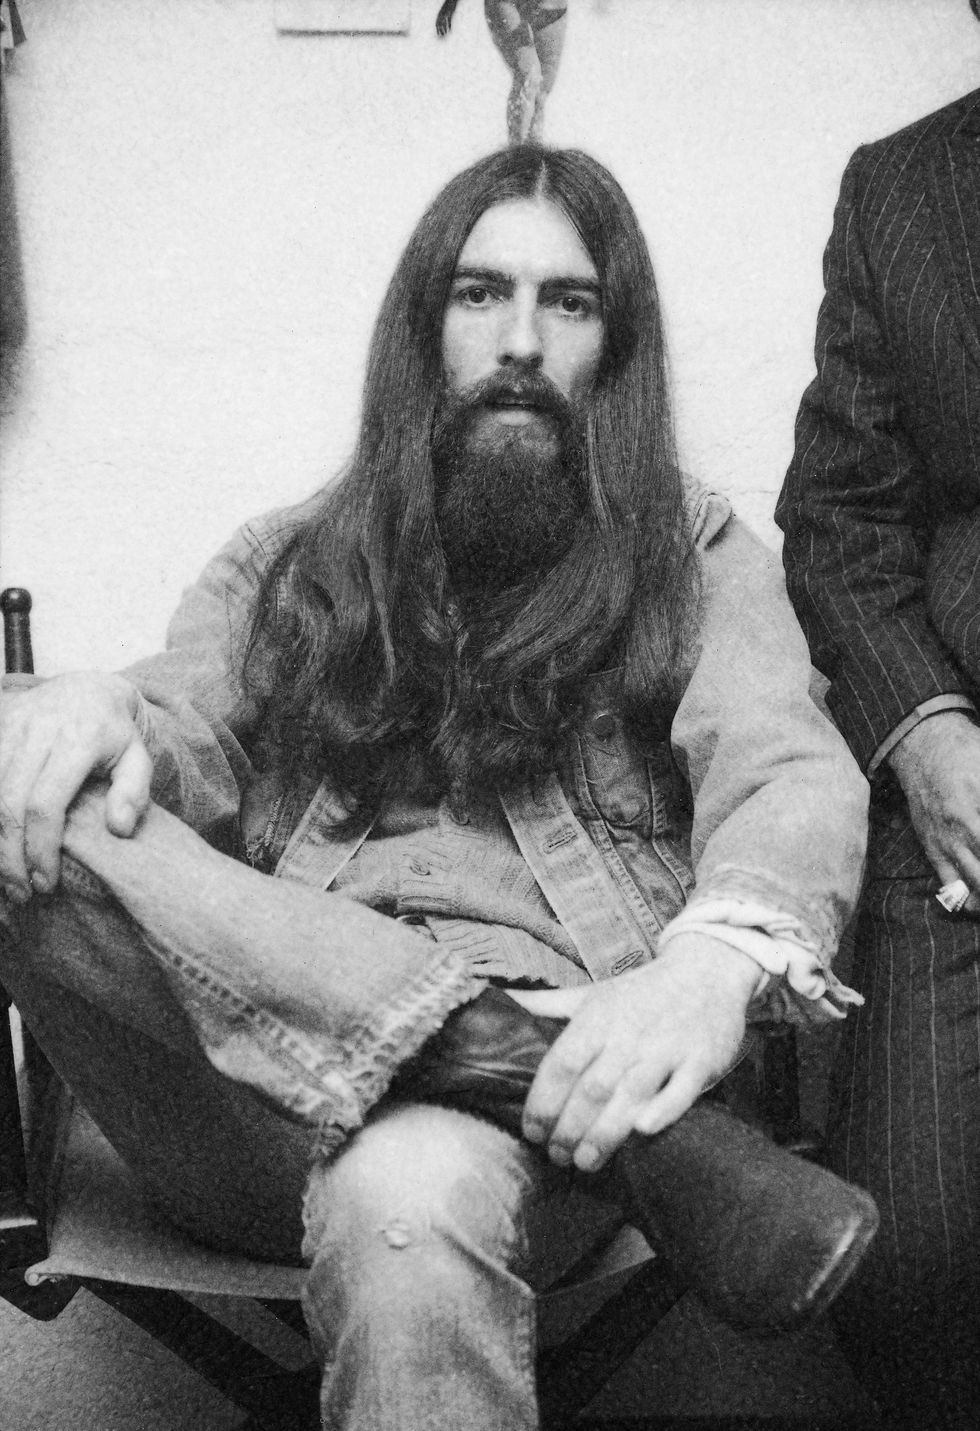 british popular rock and roll guitarist and singer george harrison 1943   2001, formerly of the beatles, sits for a photo during a party, 1971 photo by tim boxergetty images